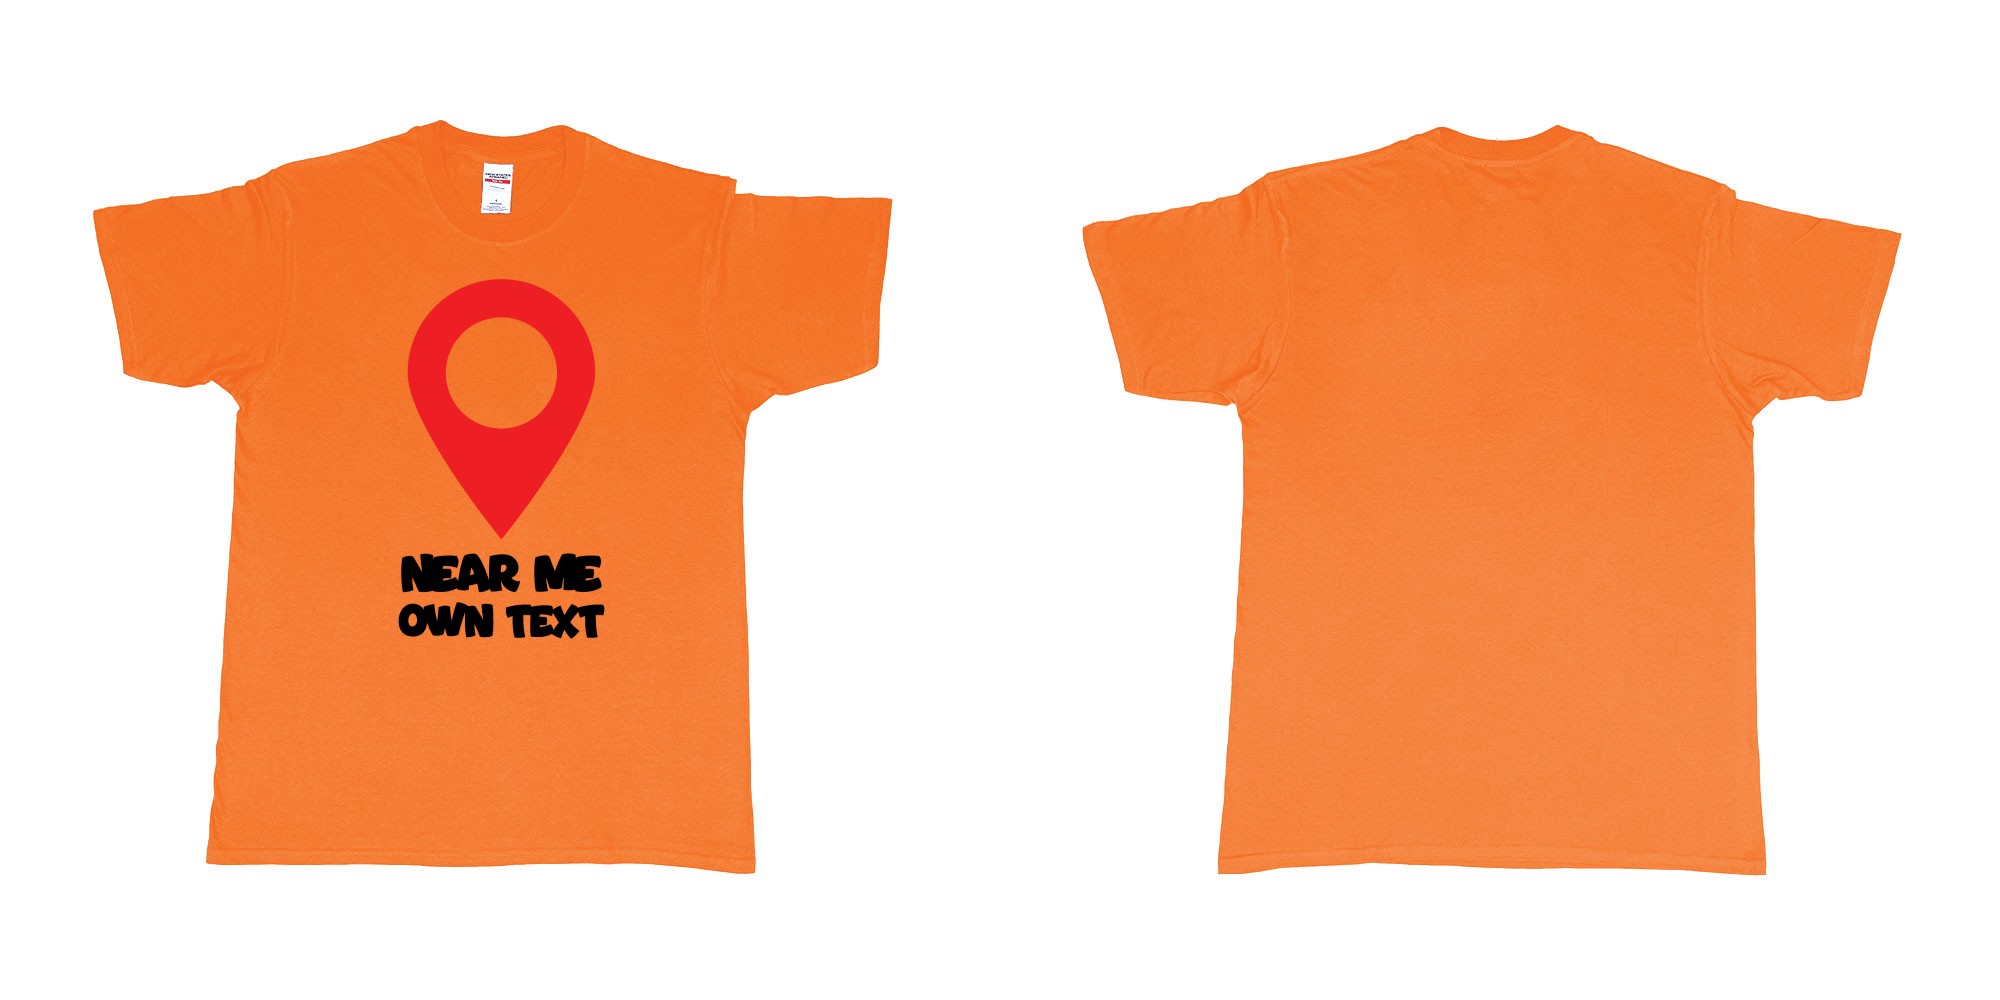 Custom tshirt design tshirt printing near me bali in fabric color orange choice your own text made in Bali by The Pirate Way